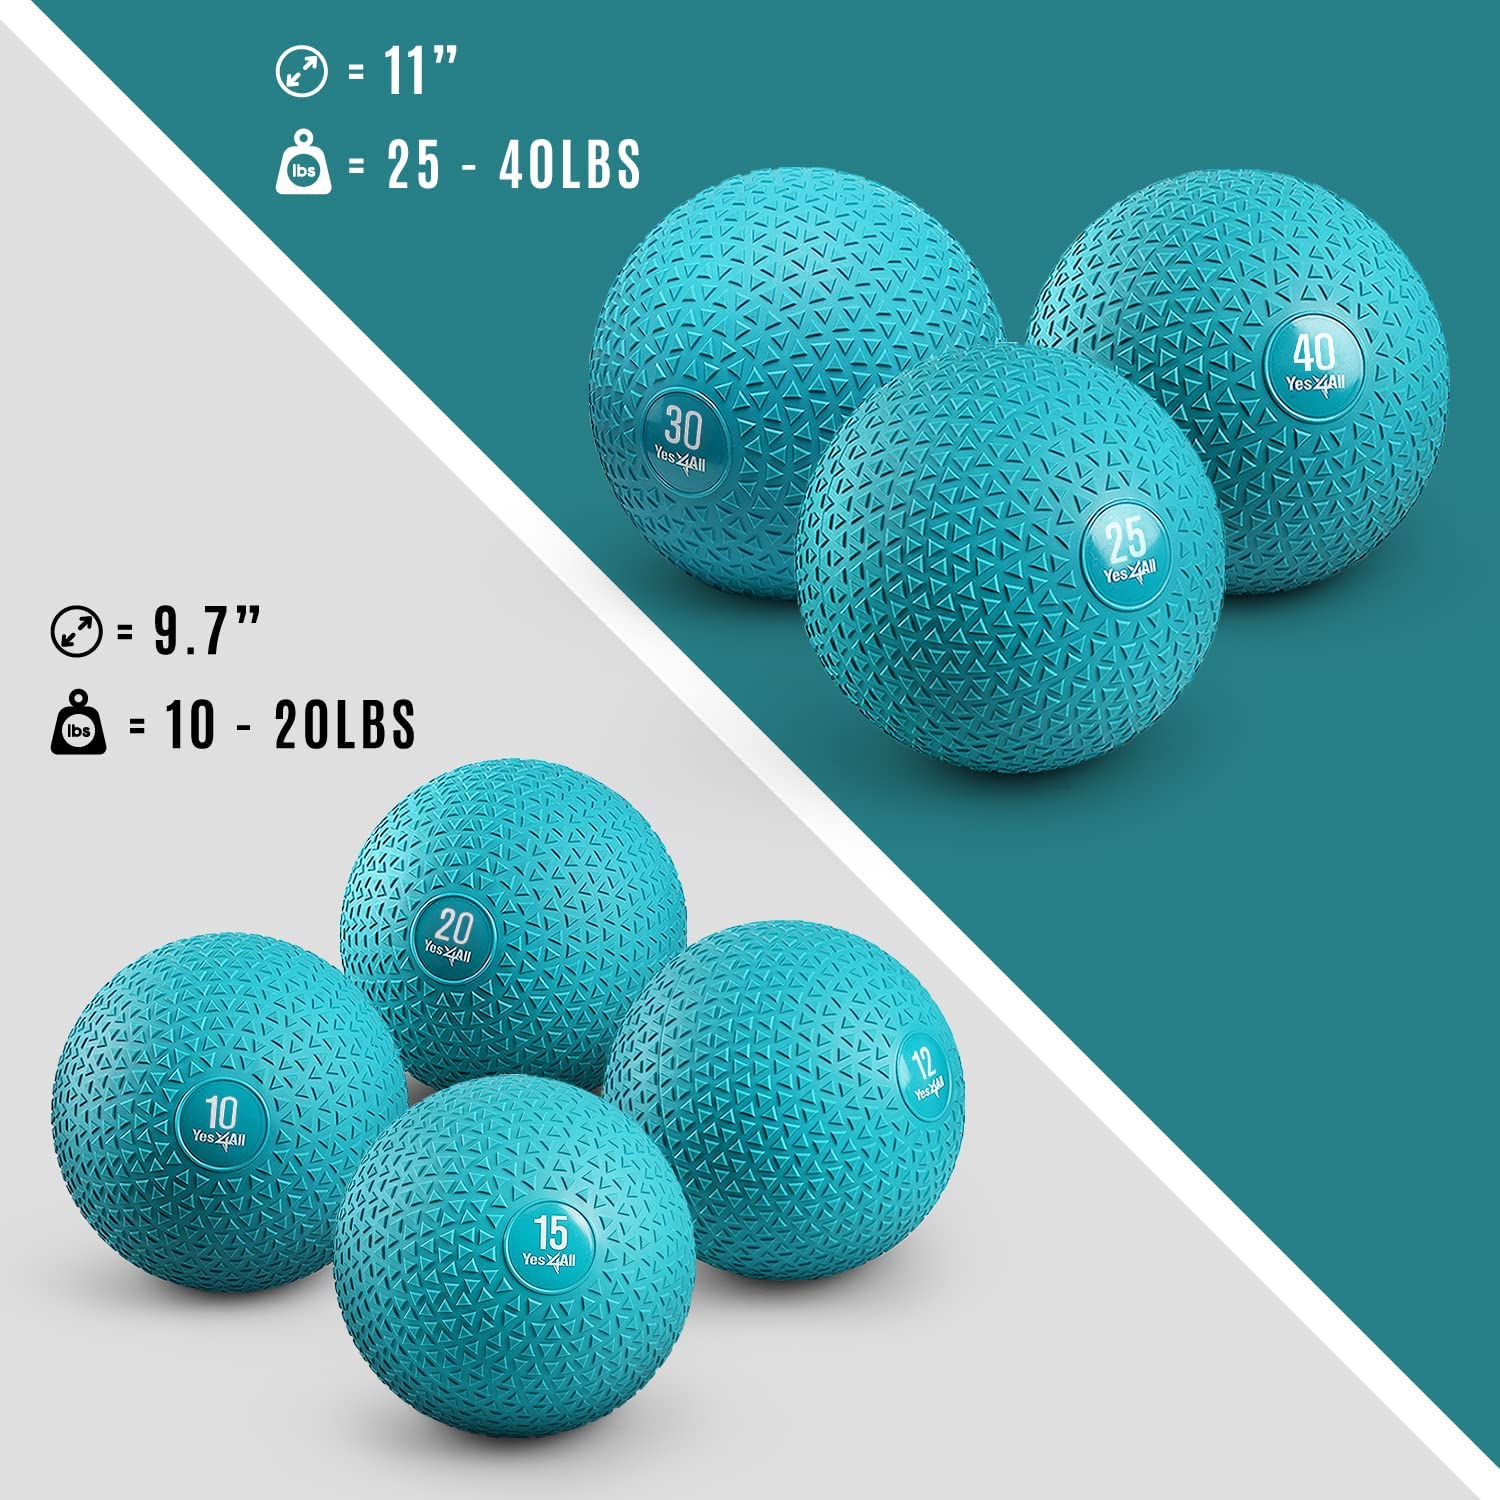 Yes4All 15lbs Slam Medicine Ball Triangle Teal - image 3 of 8